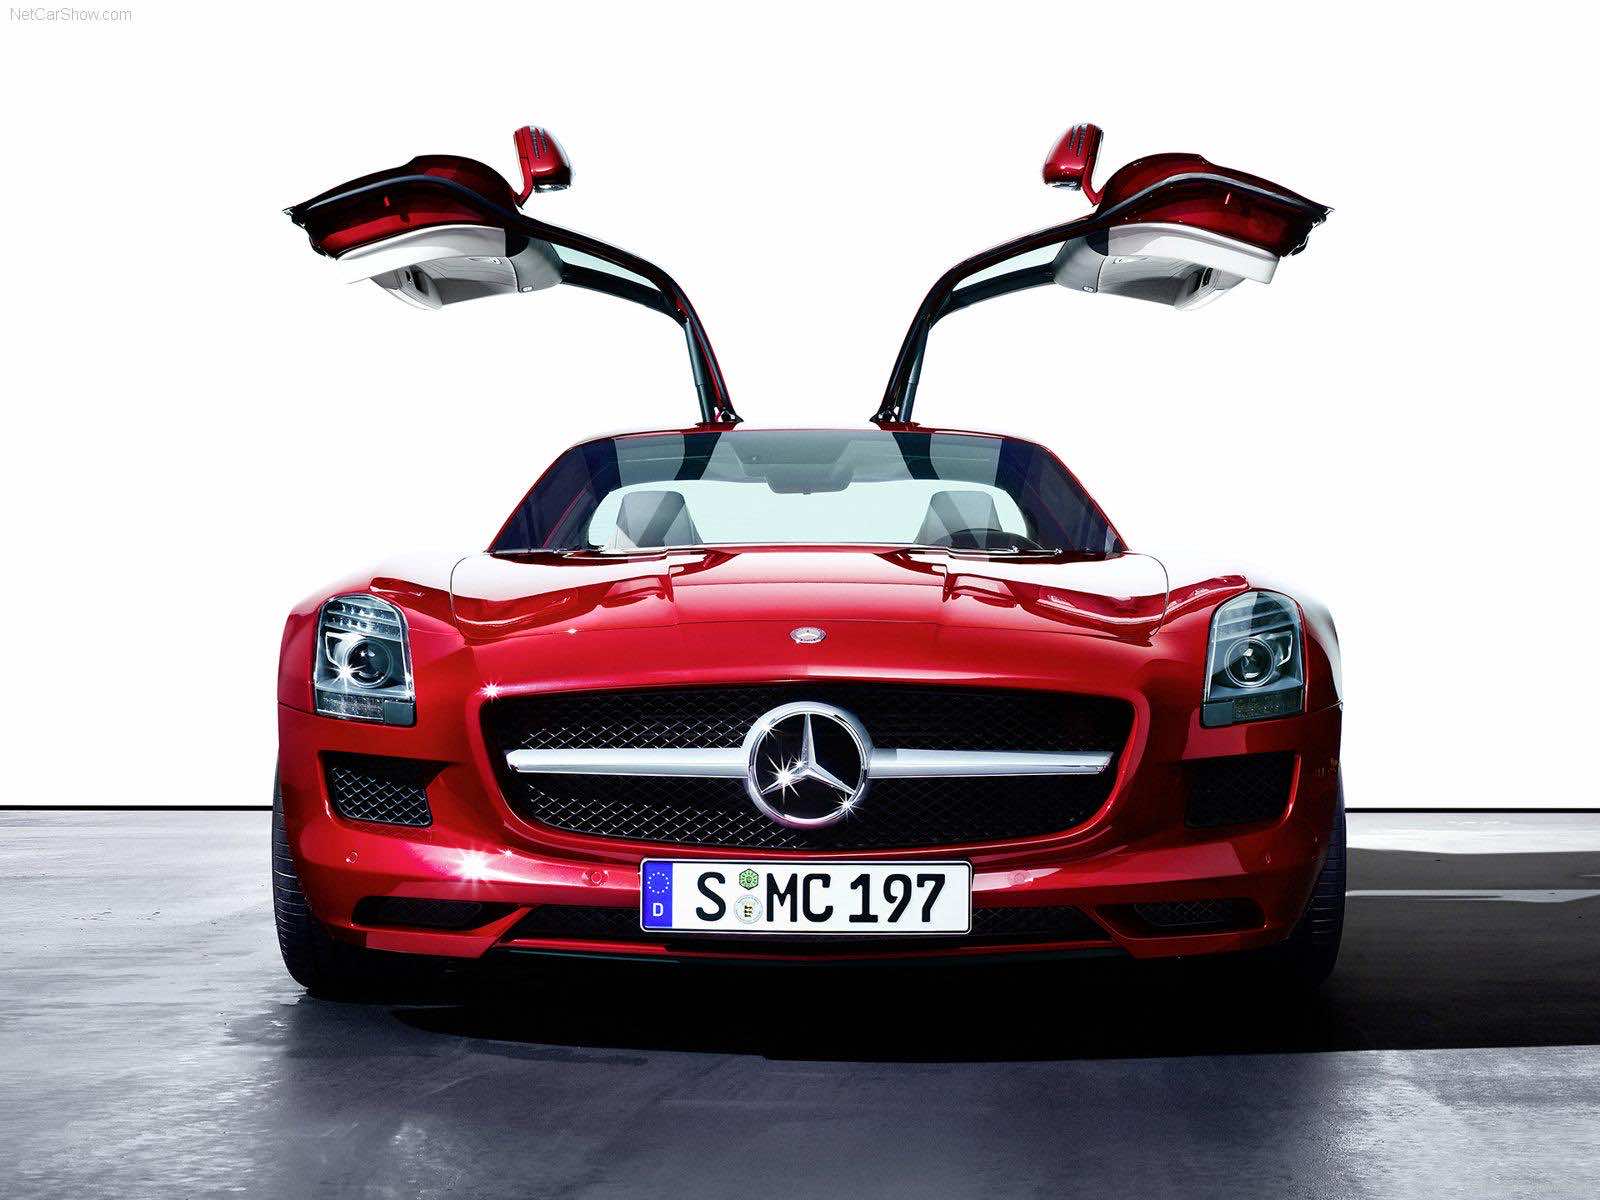 50 Hd Backgrounds And Wallpapers Of Mercedes Benz For Download